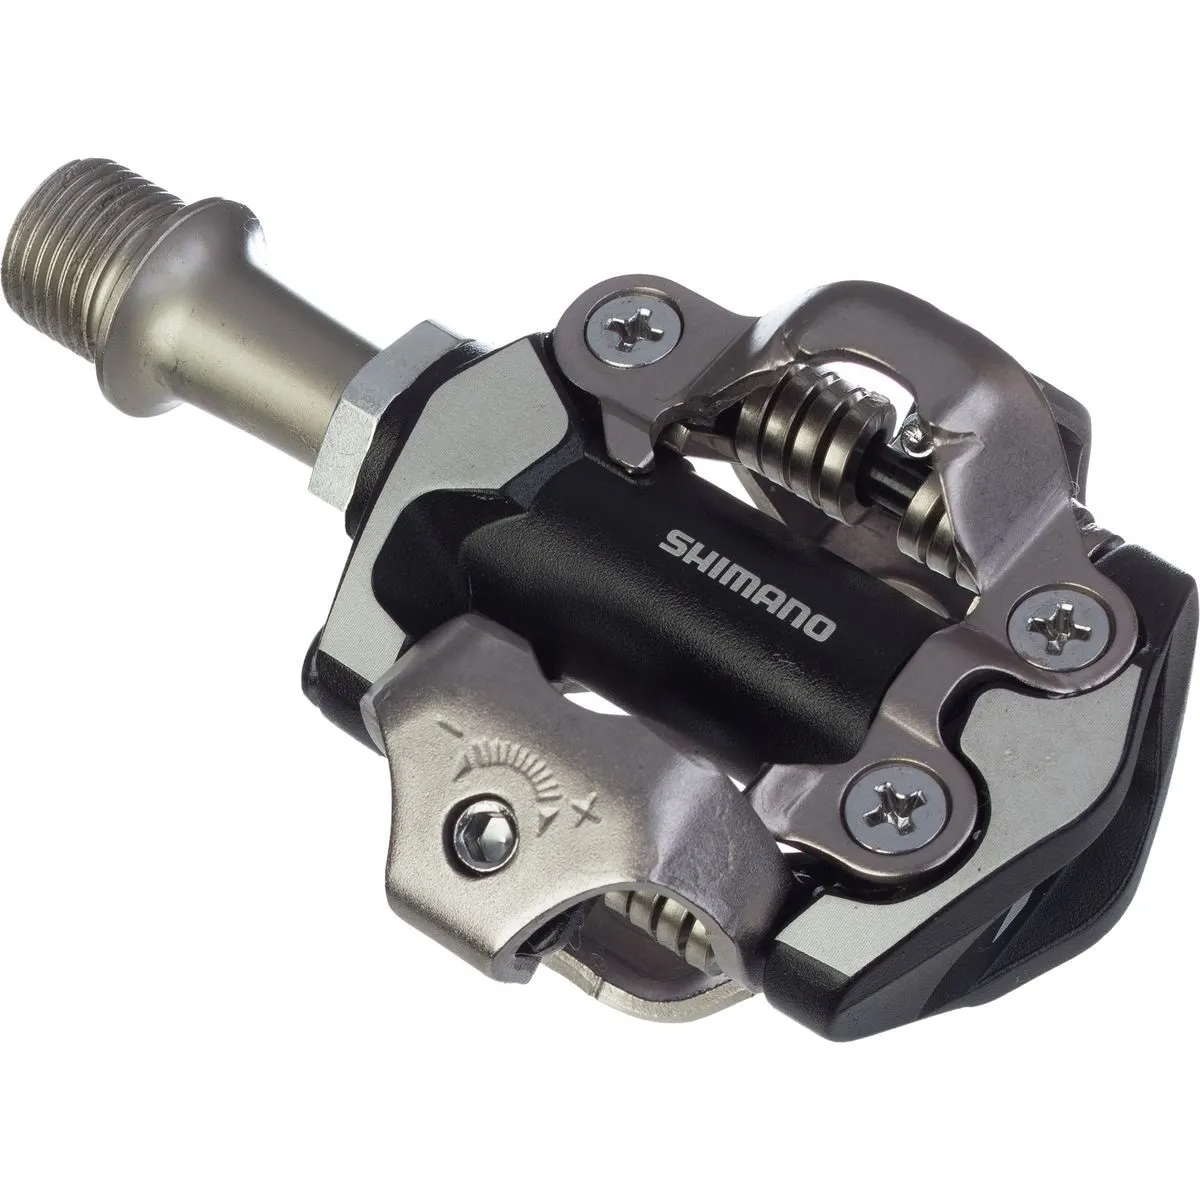 Silver clipless shimano pedal